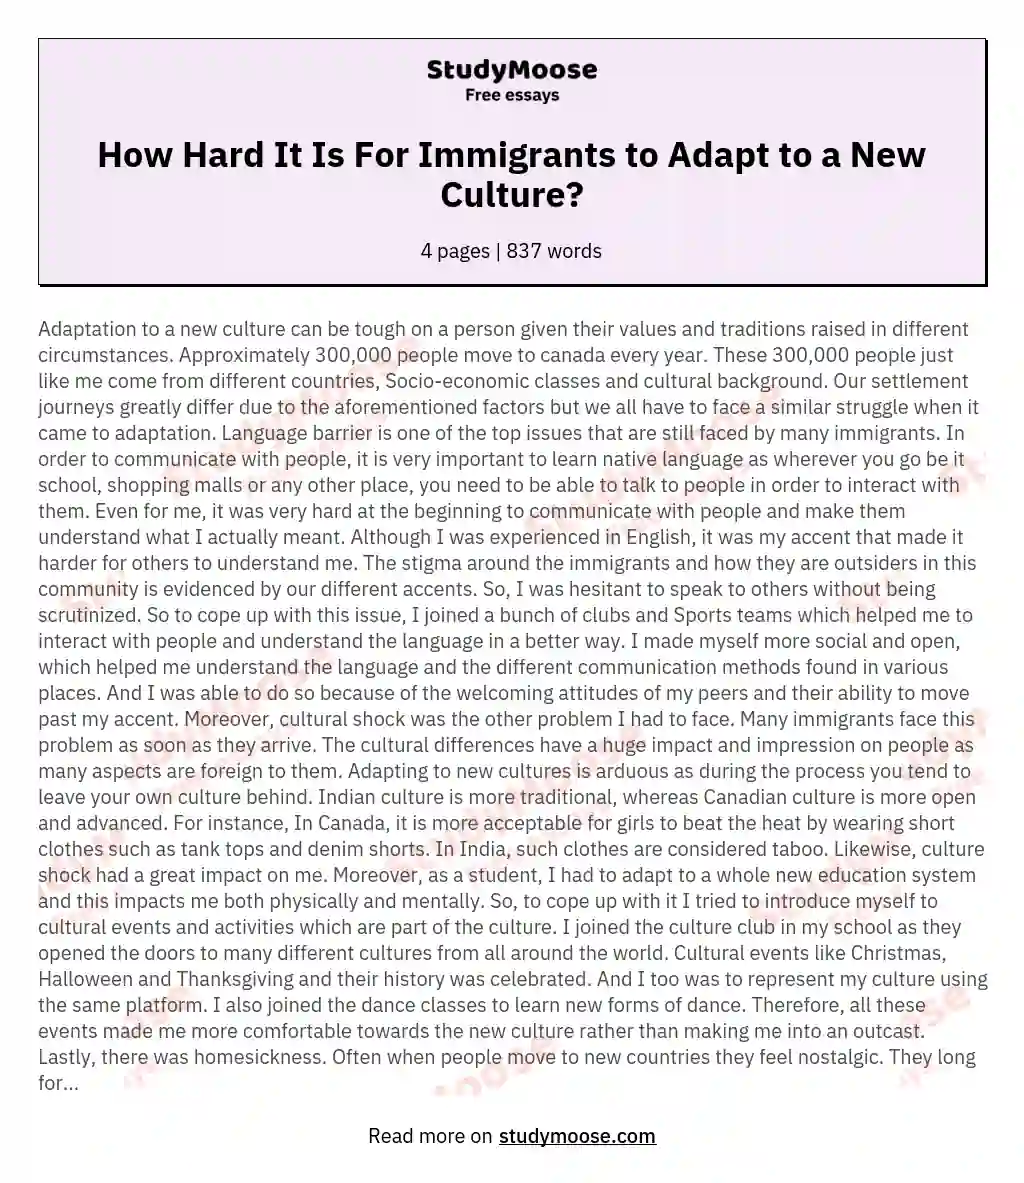 How Hard It Is For Immigrants to Adapt to a New Culture?